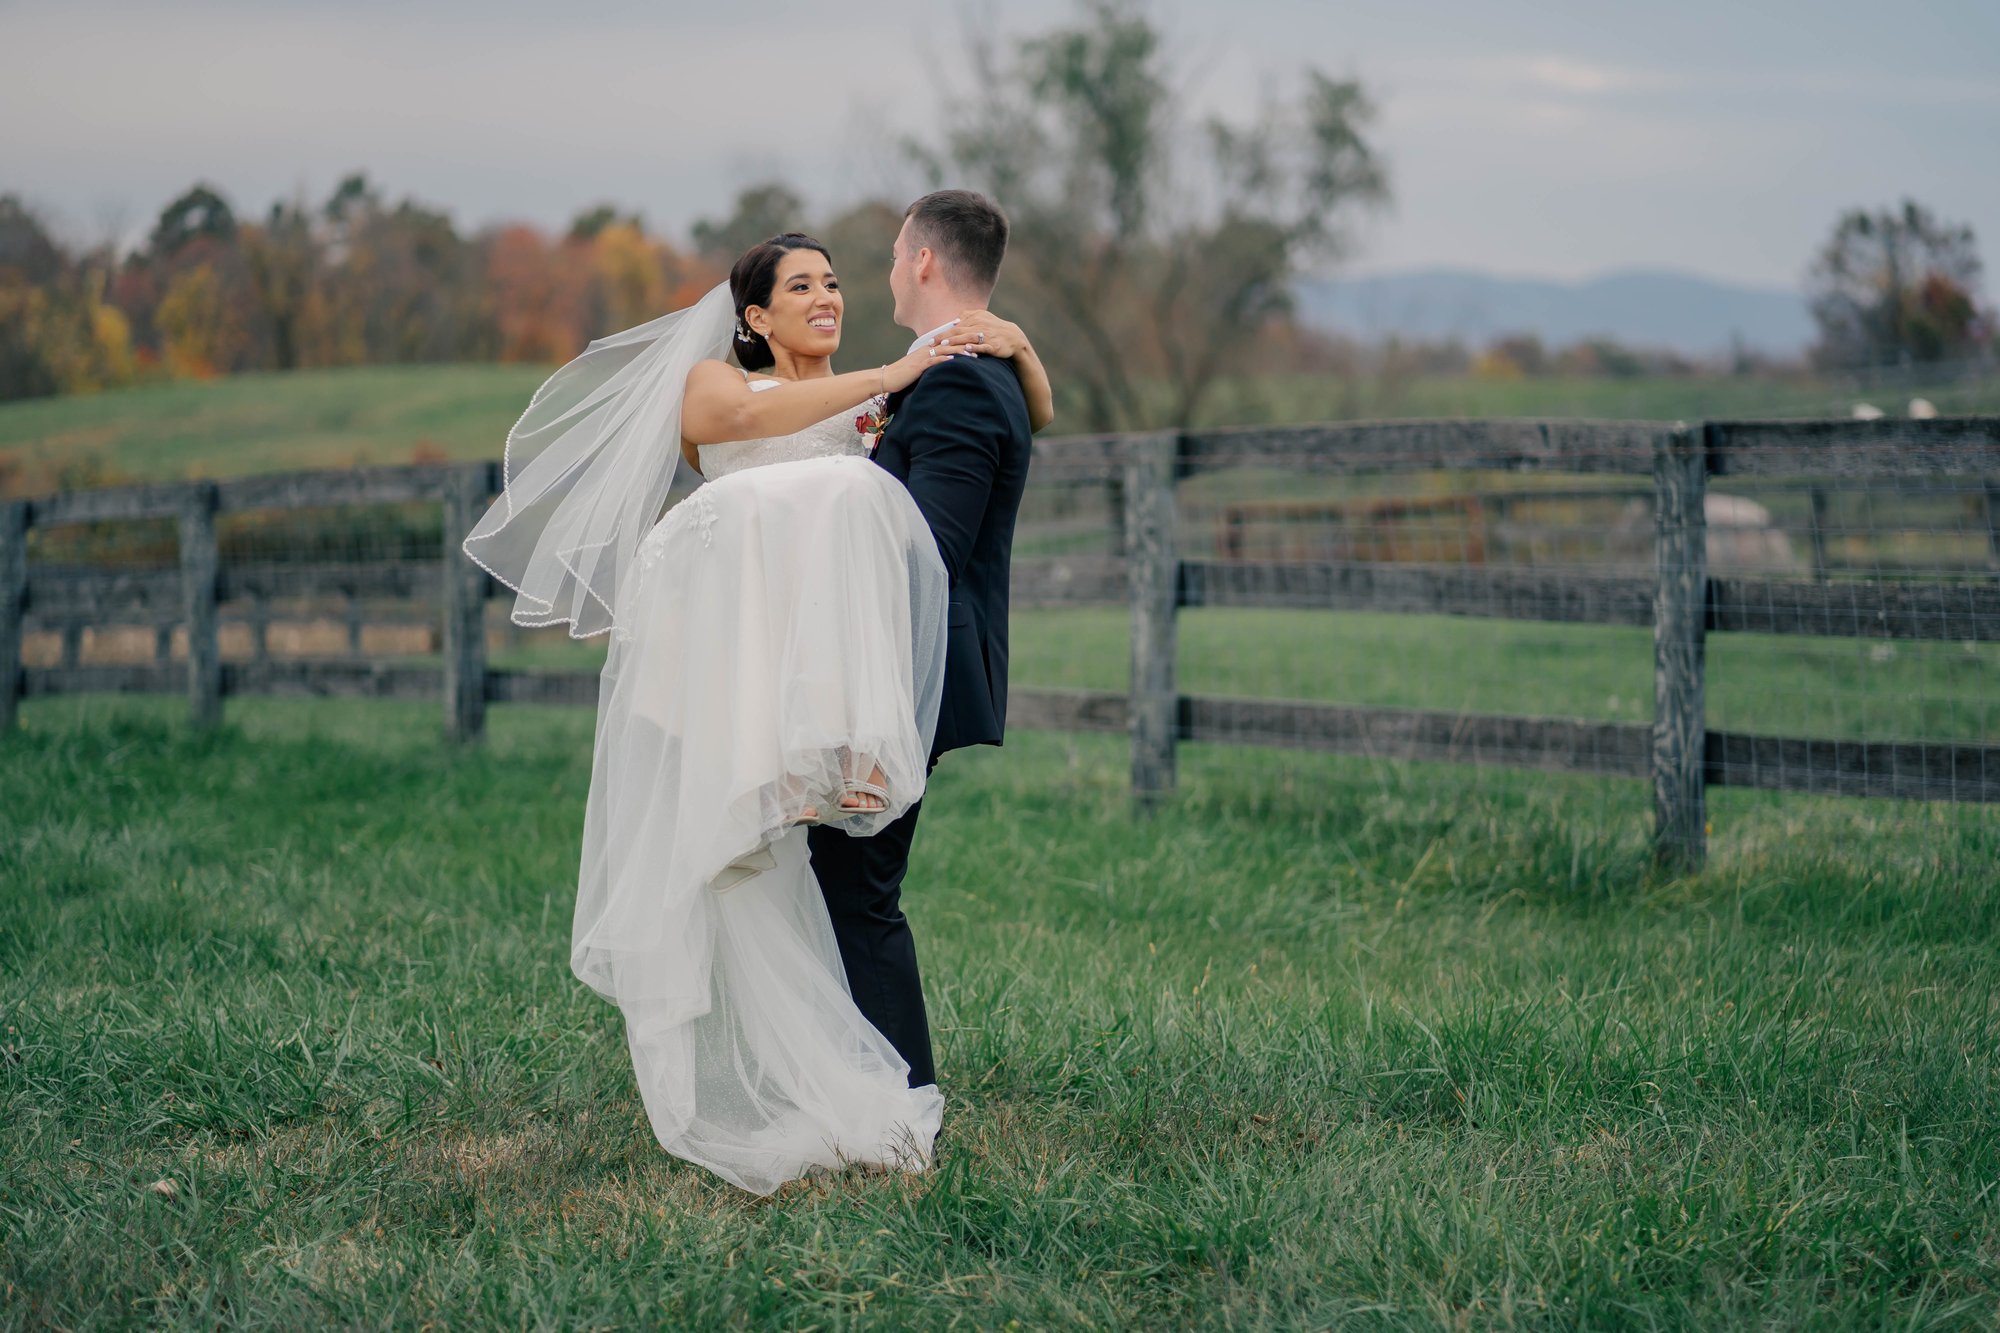 Wedding photo of a couple at Leesburg Wedding Venue captured by Stephanie Grooms Artistry